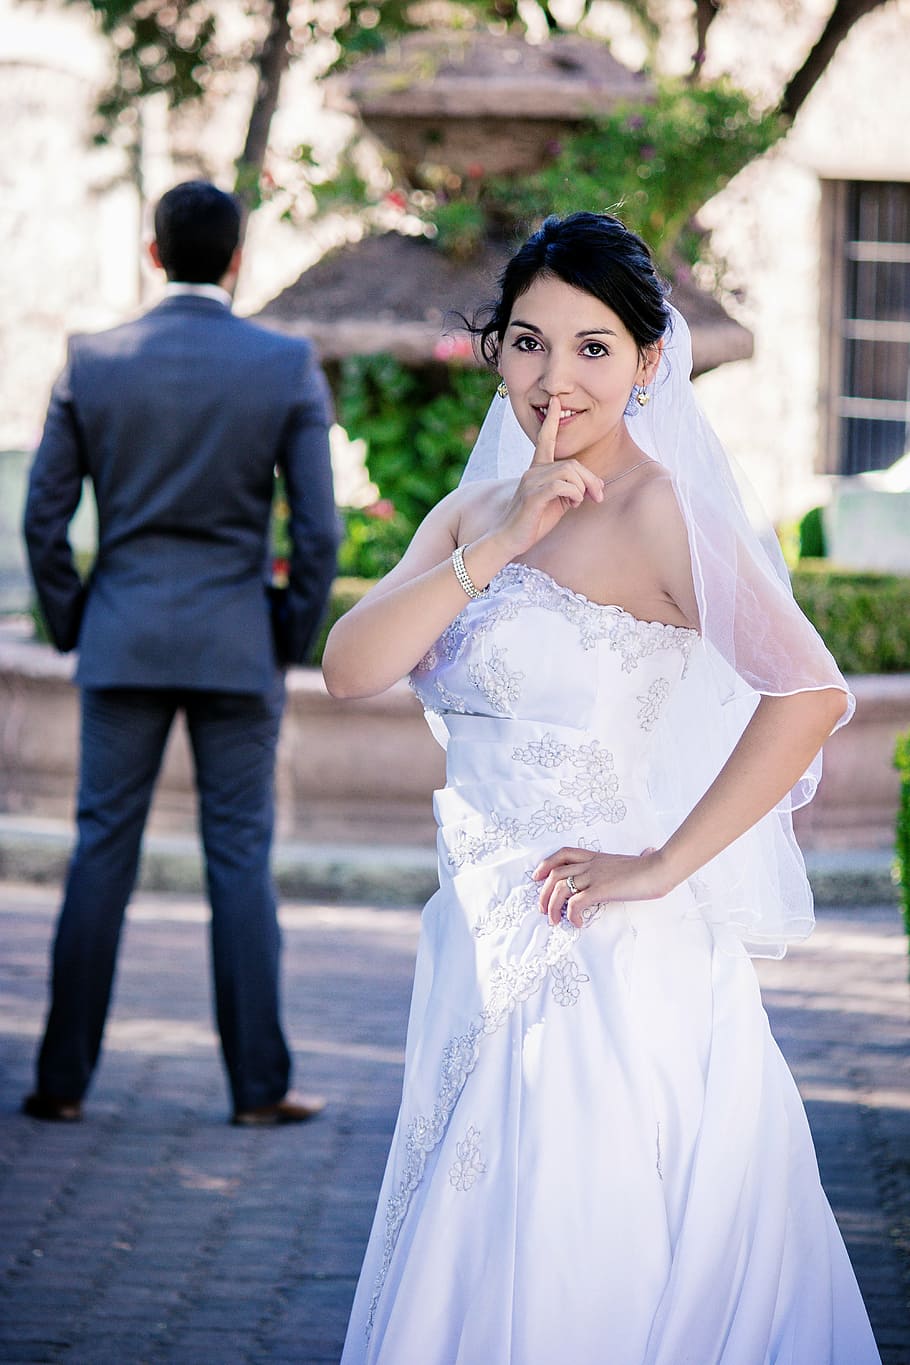 woman, white, strapless wedding gown, showing, silence gesture, sneaky, bride, finger, girl, groom